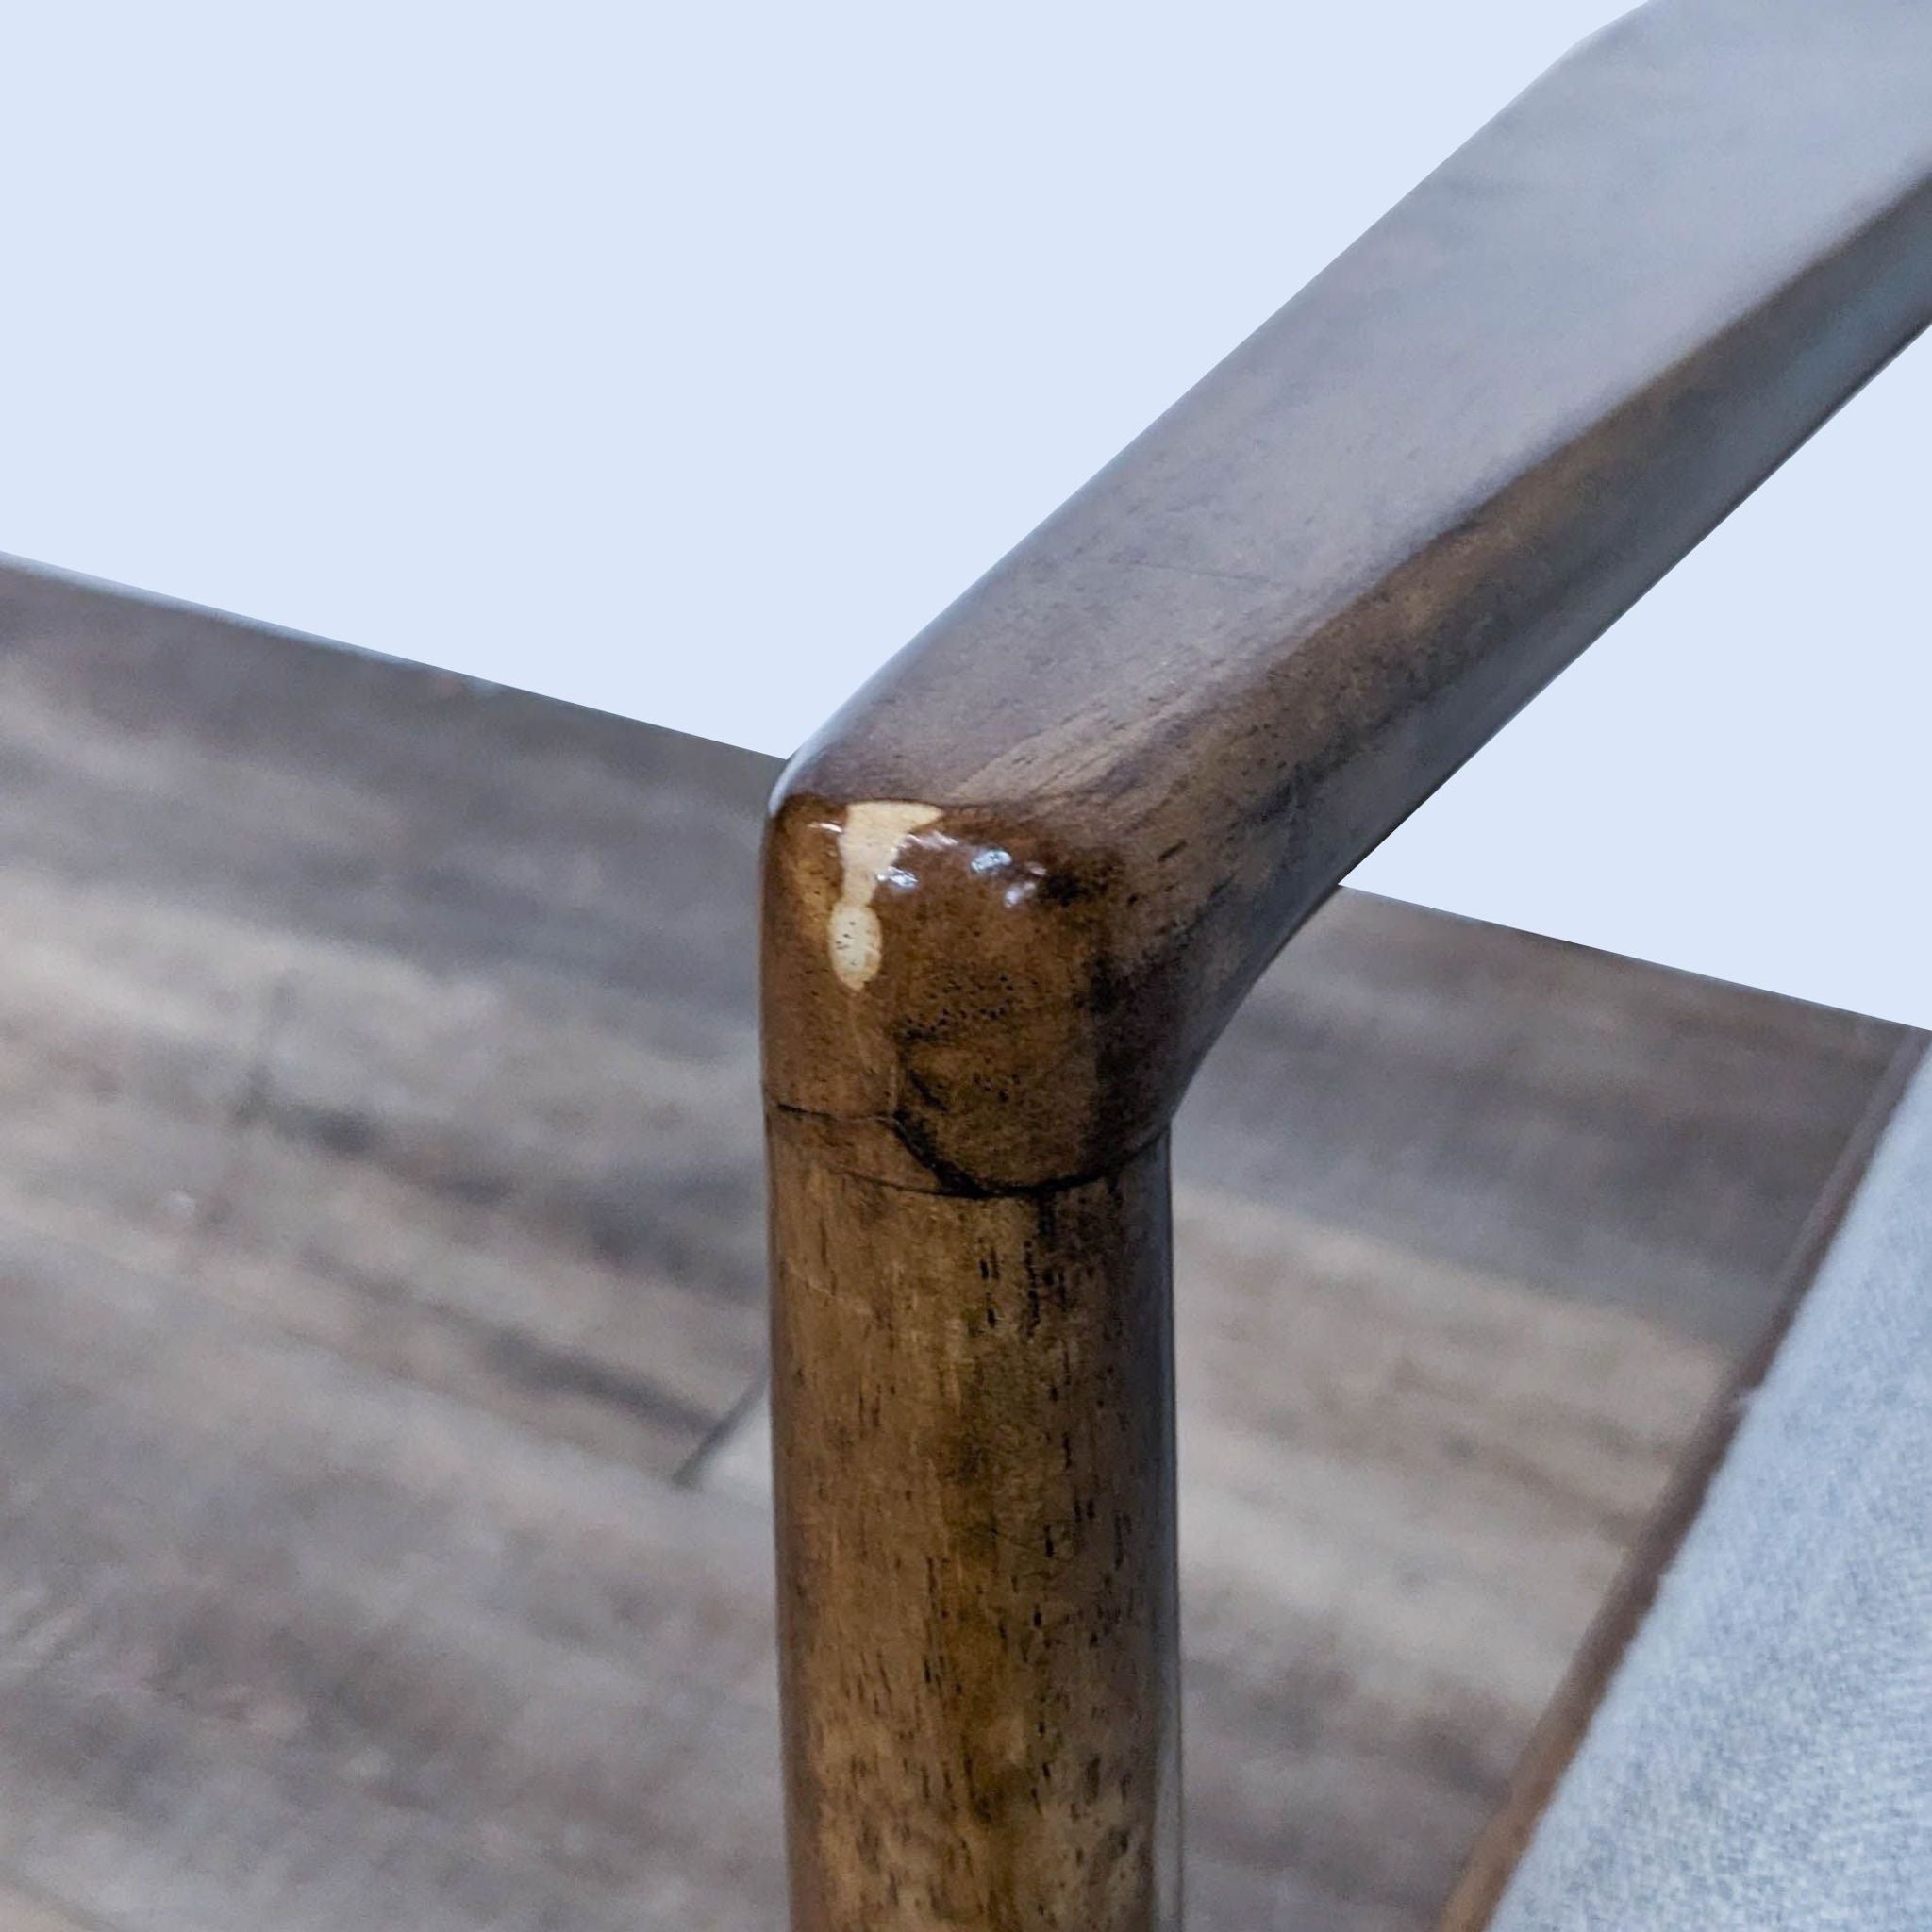 Close-up of the Prescott Accent Chair's wooden arm with brown finish by Madison Park showing detail and texture.